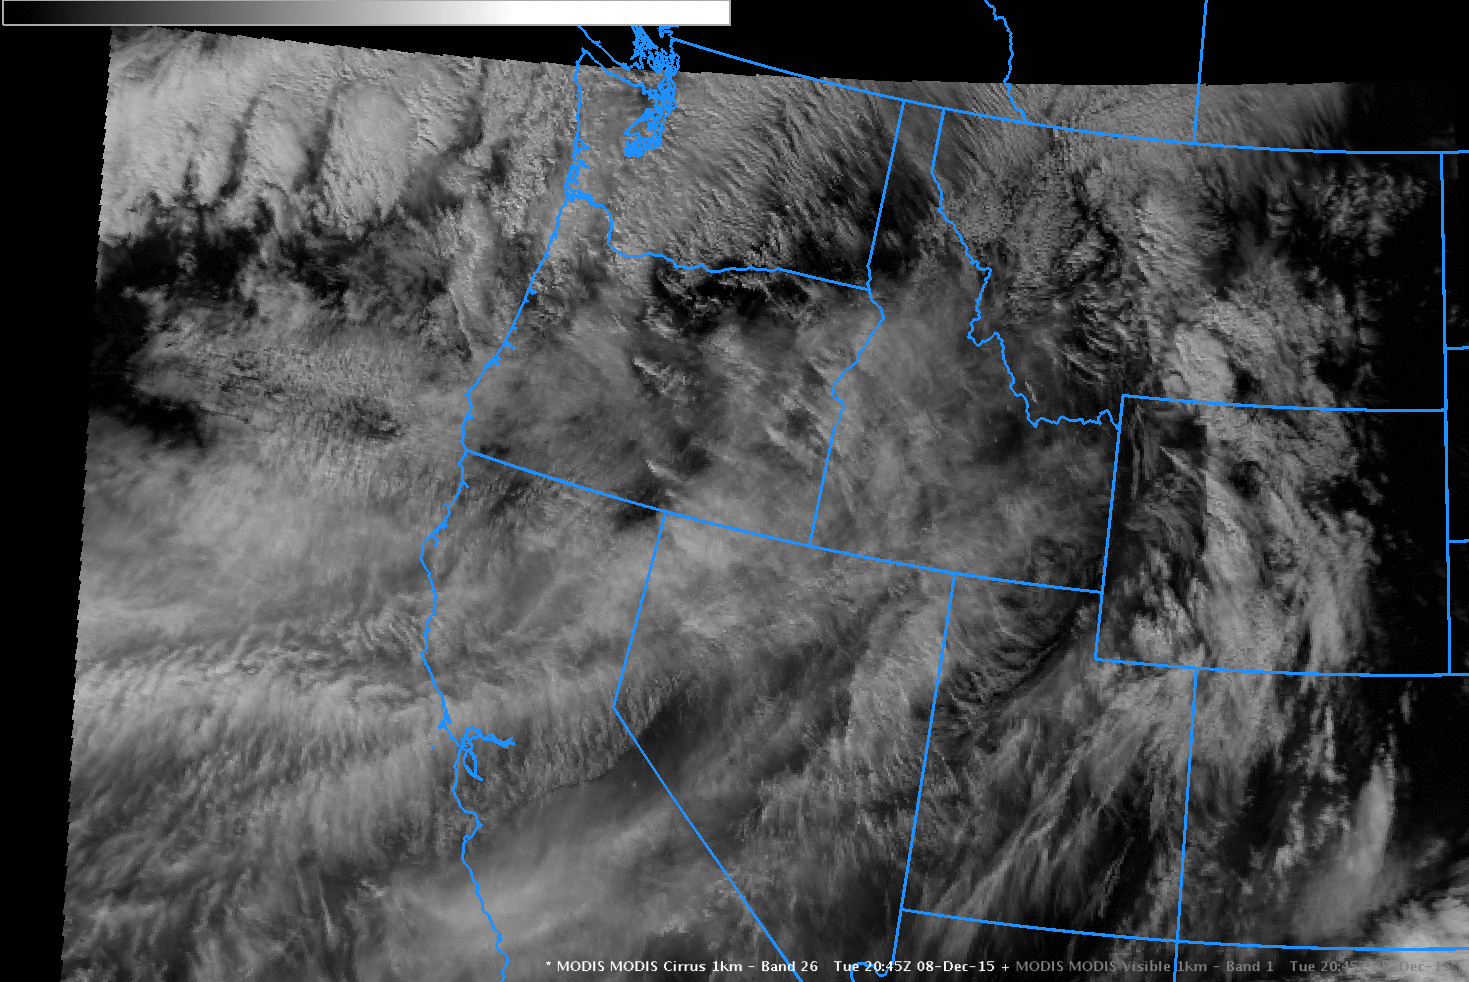 Aqua MODIS Cirrus Channel (1.38 µm) and Visible Channel (0.64 µm) imagery, 2045 UTC on 8 December 2015 [click to enlarge]